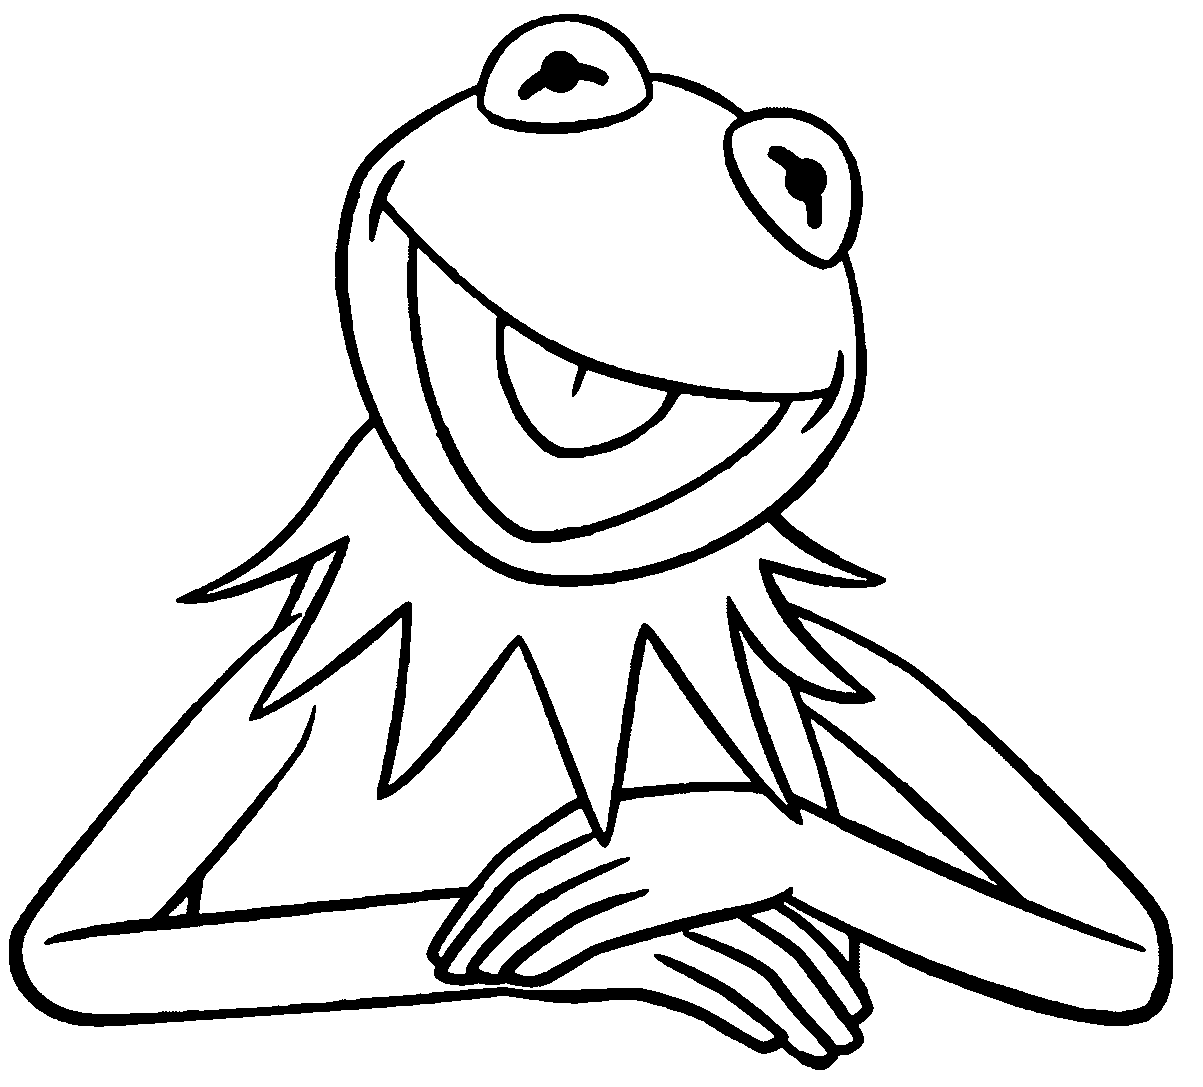 The Muppets Kermit The Frog 9 Coloring Pages